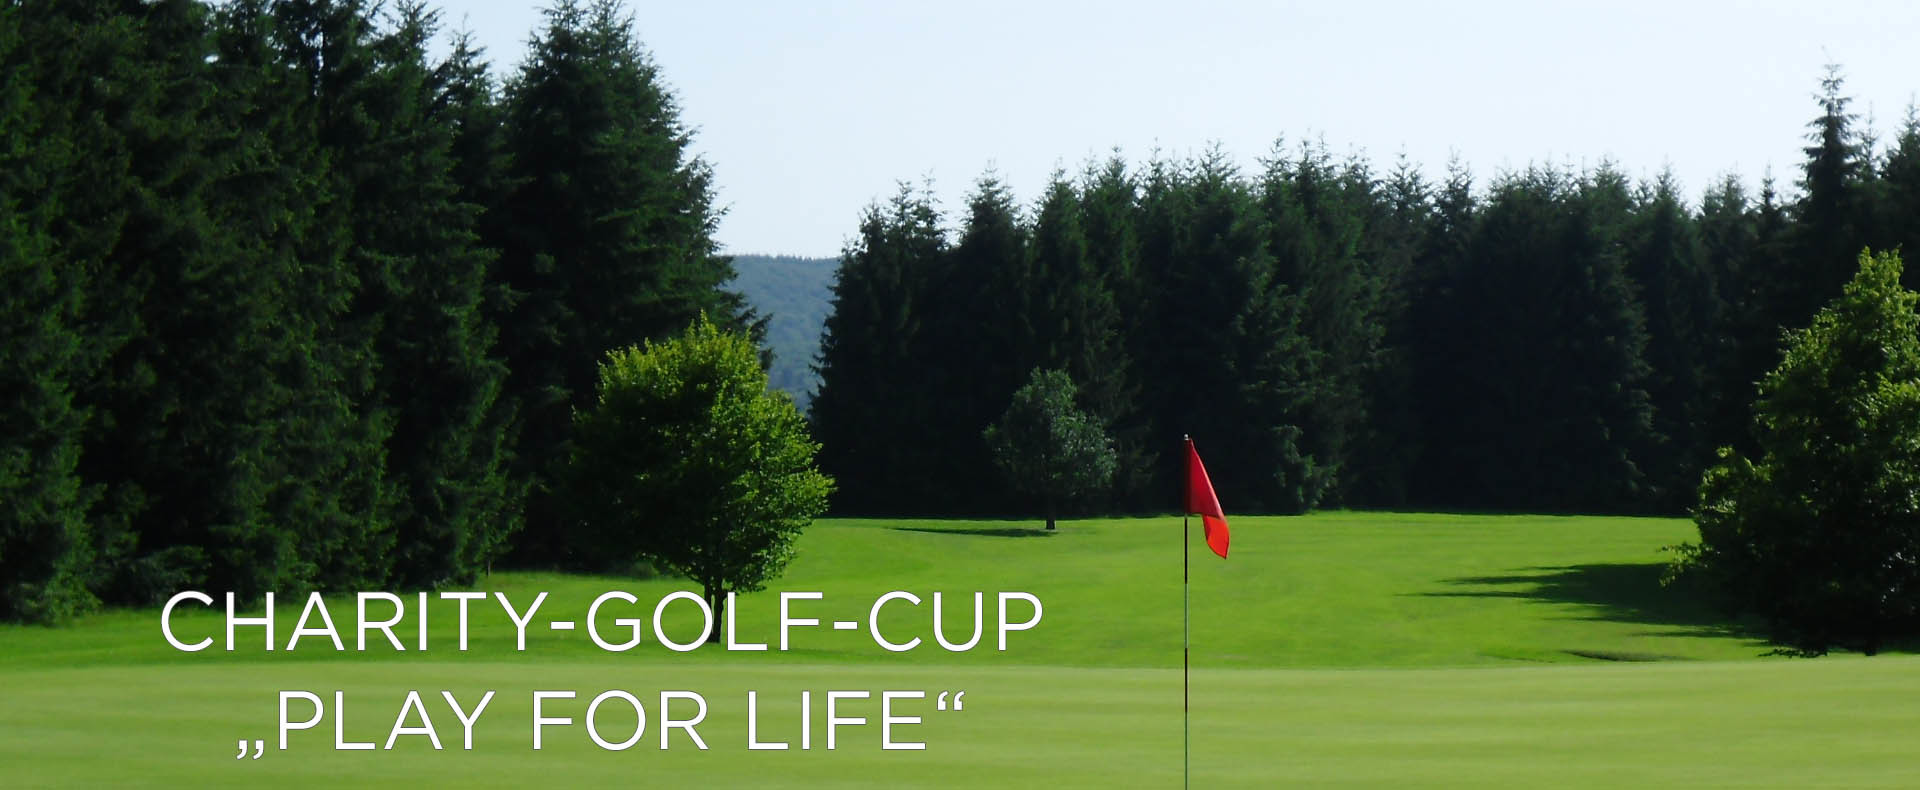 Charity-Golf-Cup „Play for Life“ am 14.Juni 2015 (© Great Lengths)